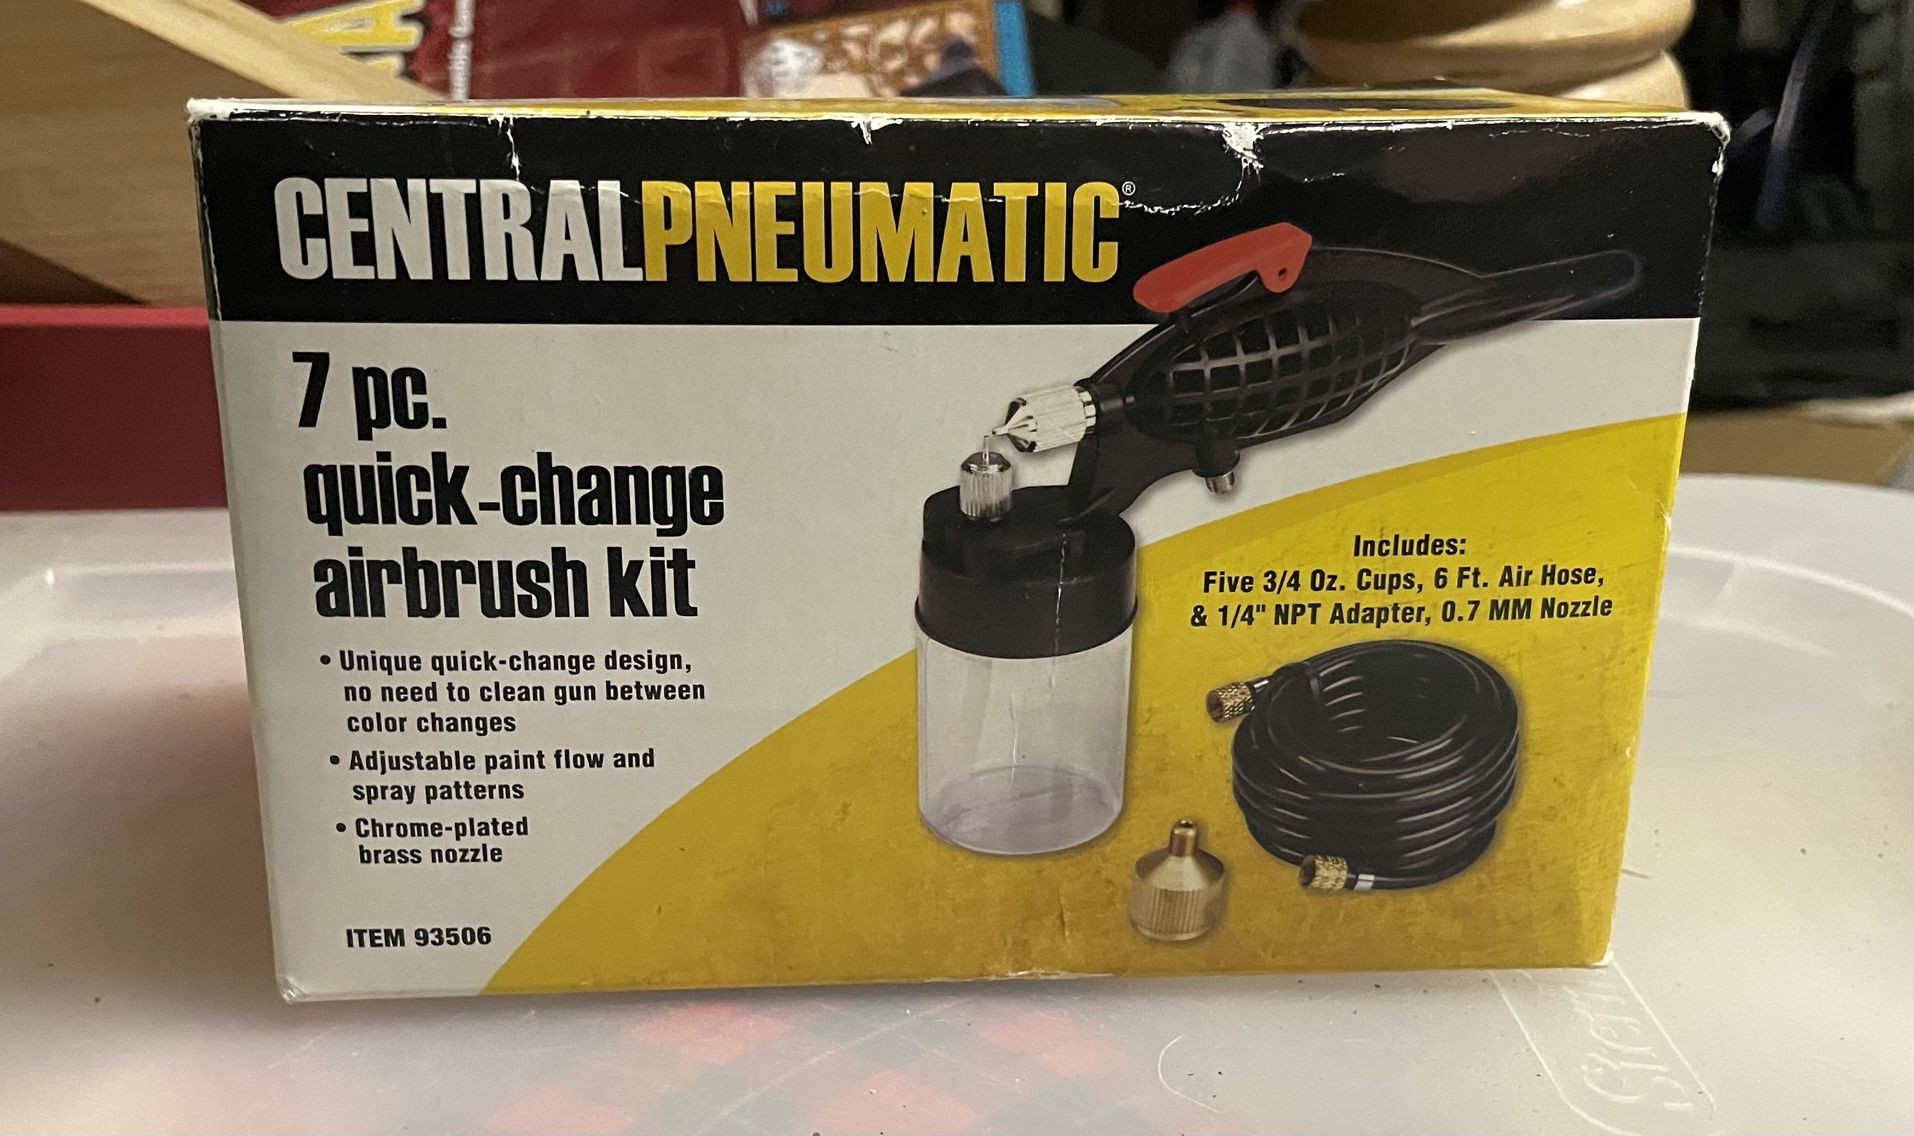 Airbrush Compressor And Kit (never used)